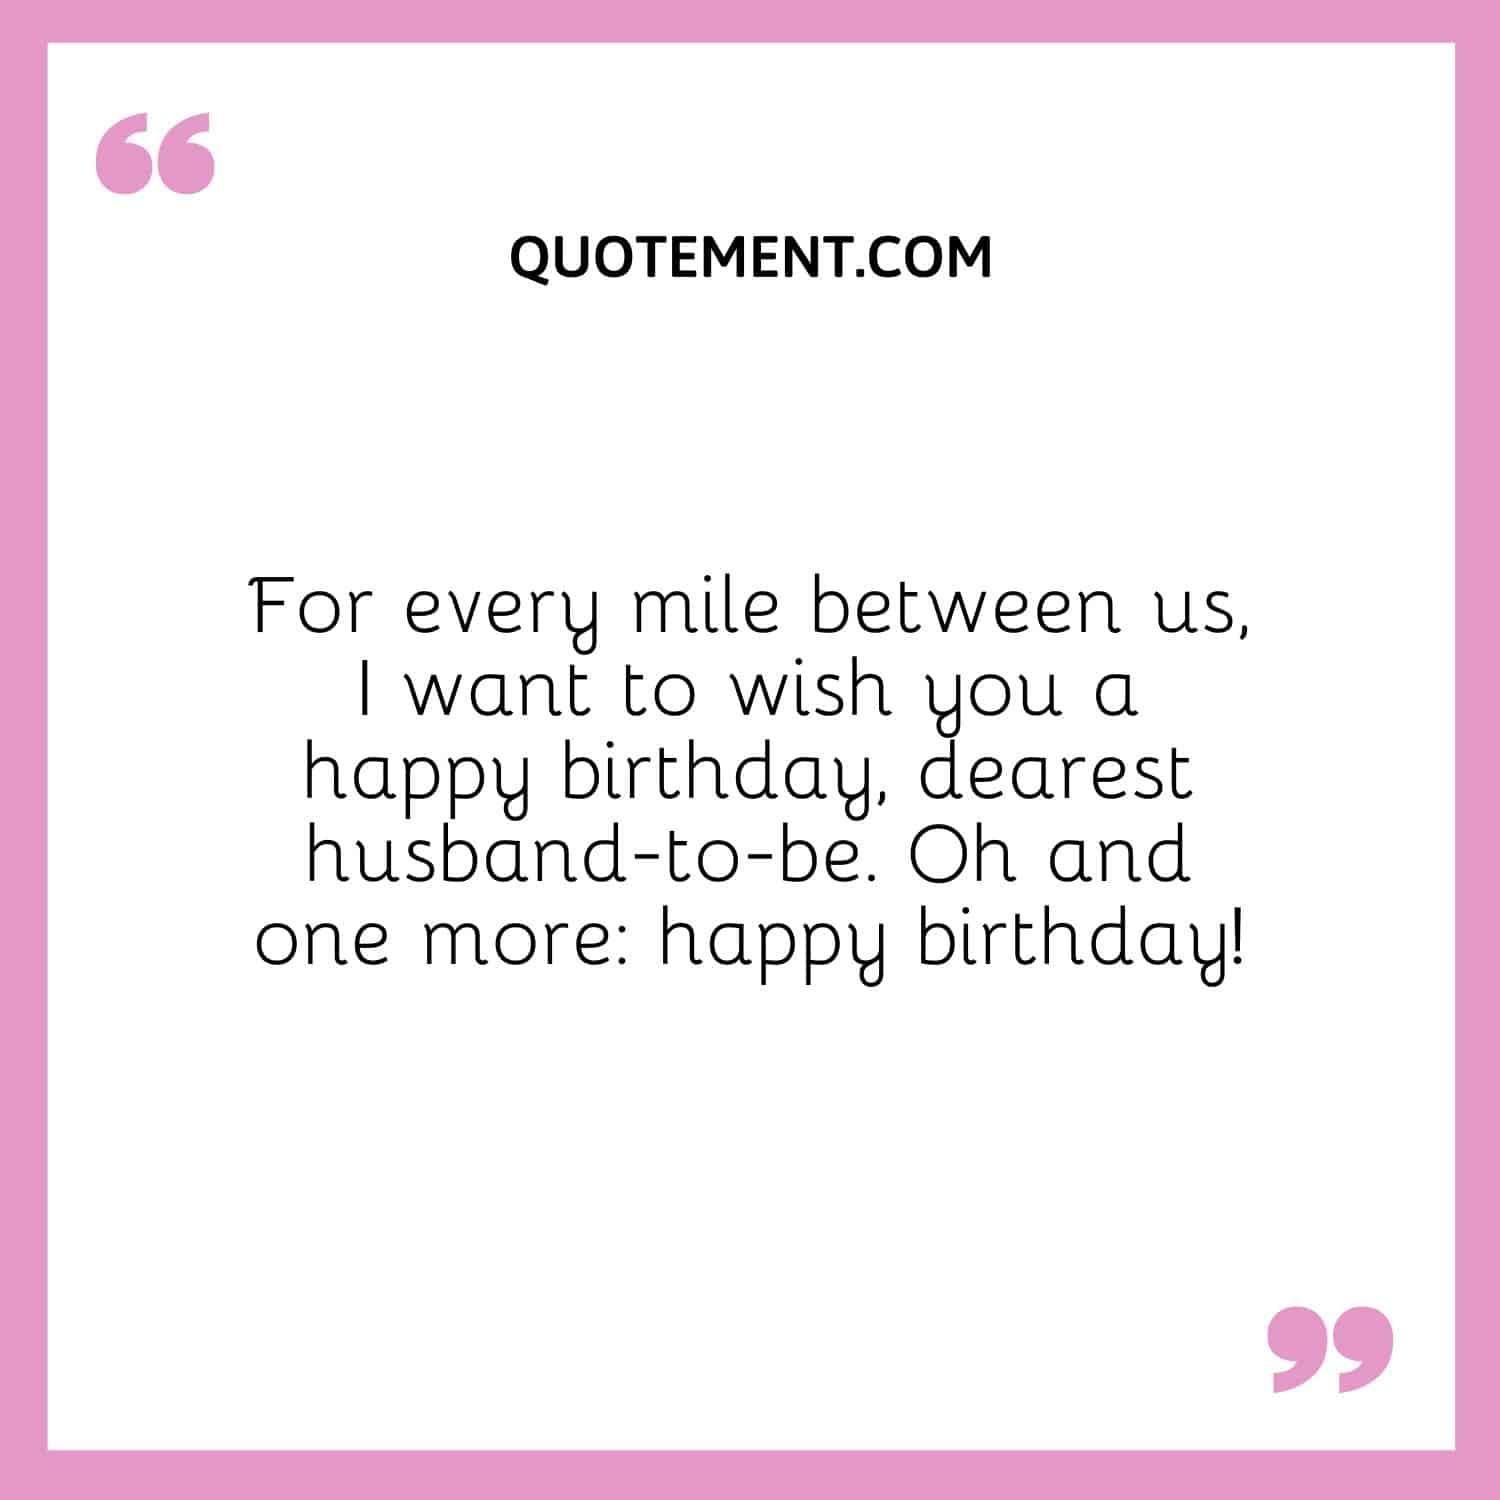 For every mile between us, I want to wish you a happy birthday